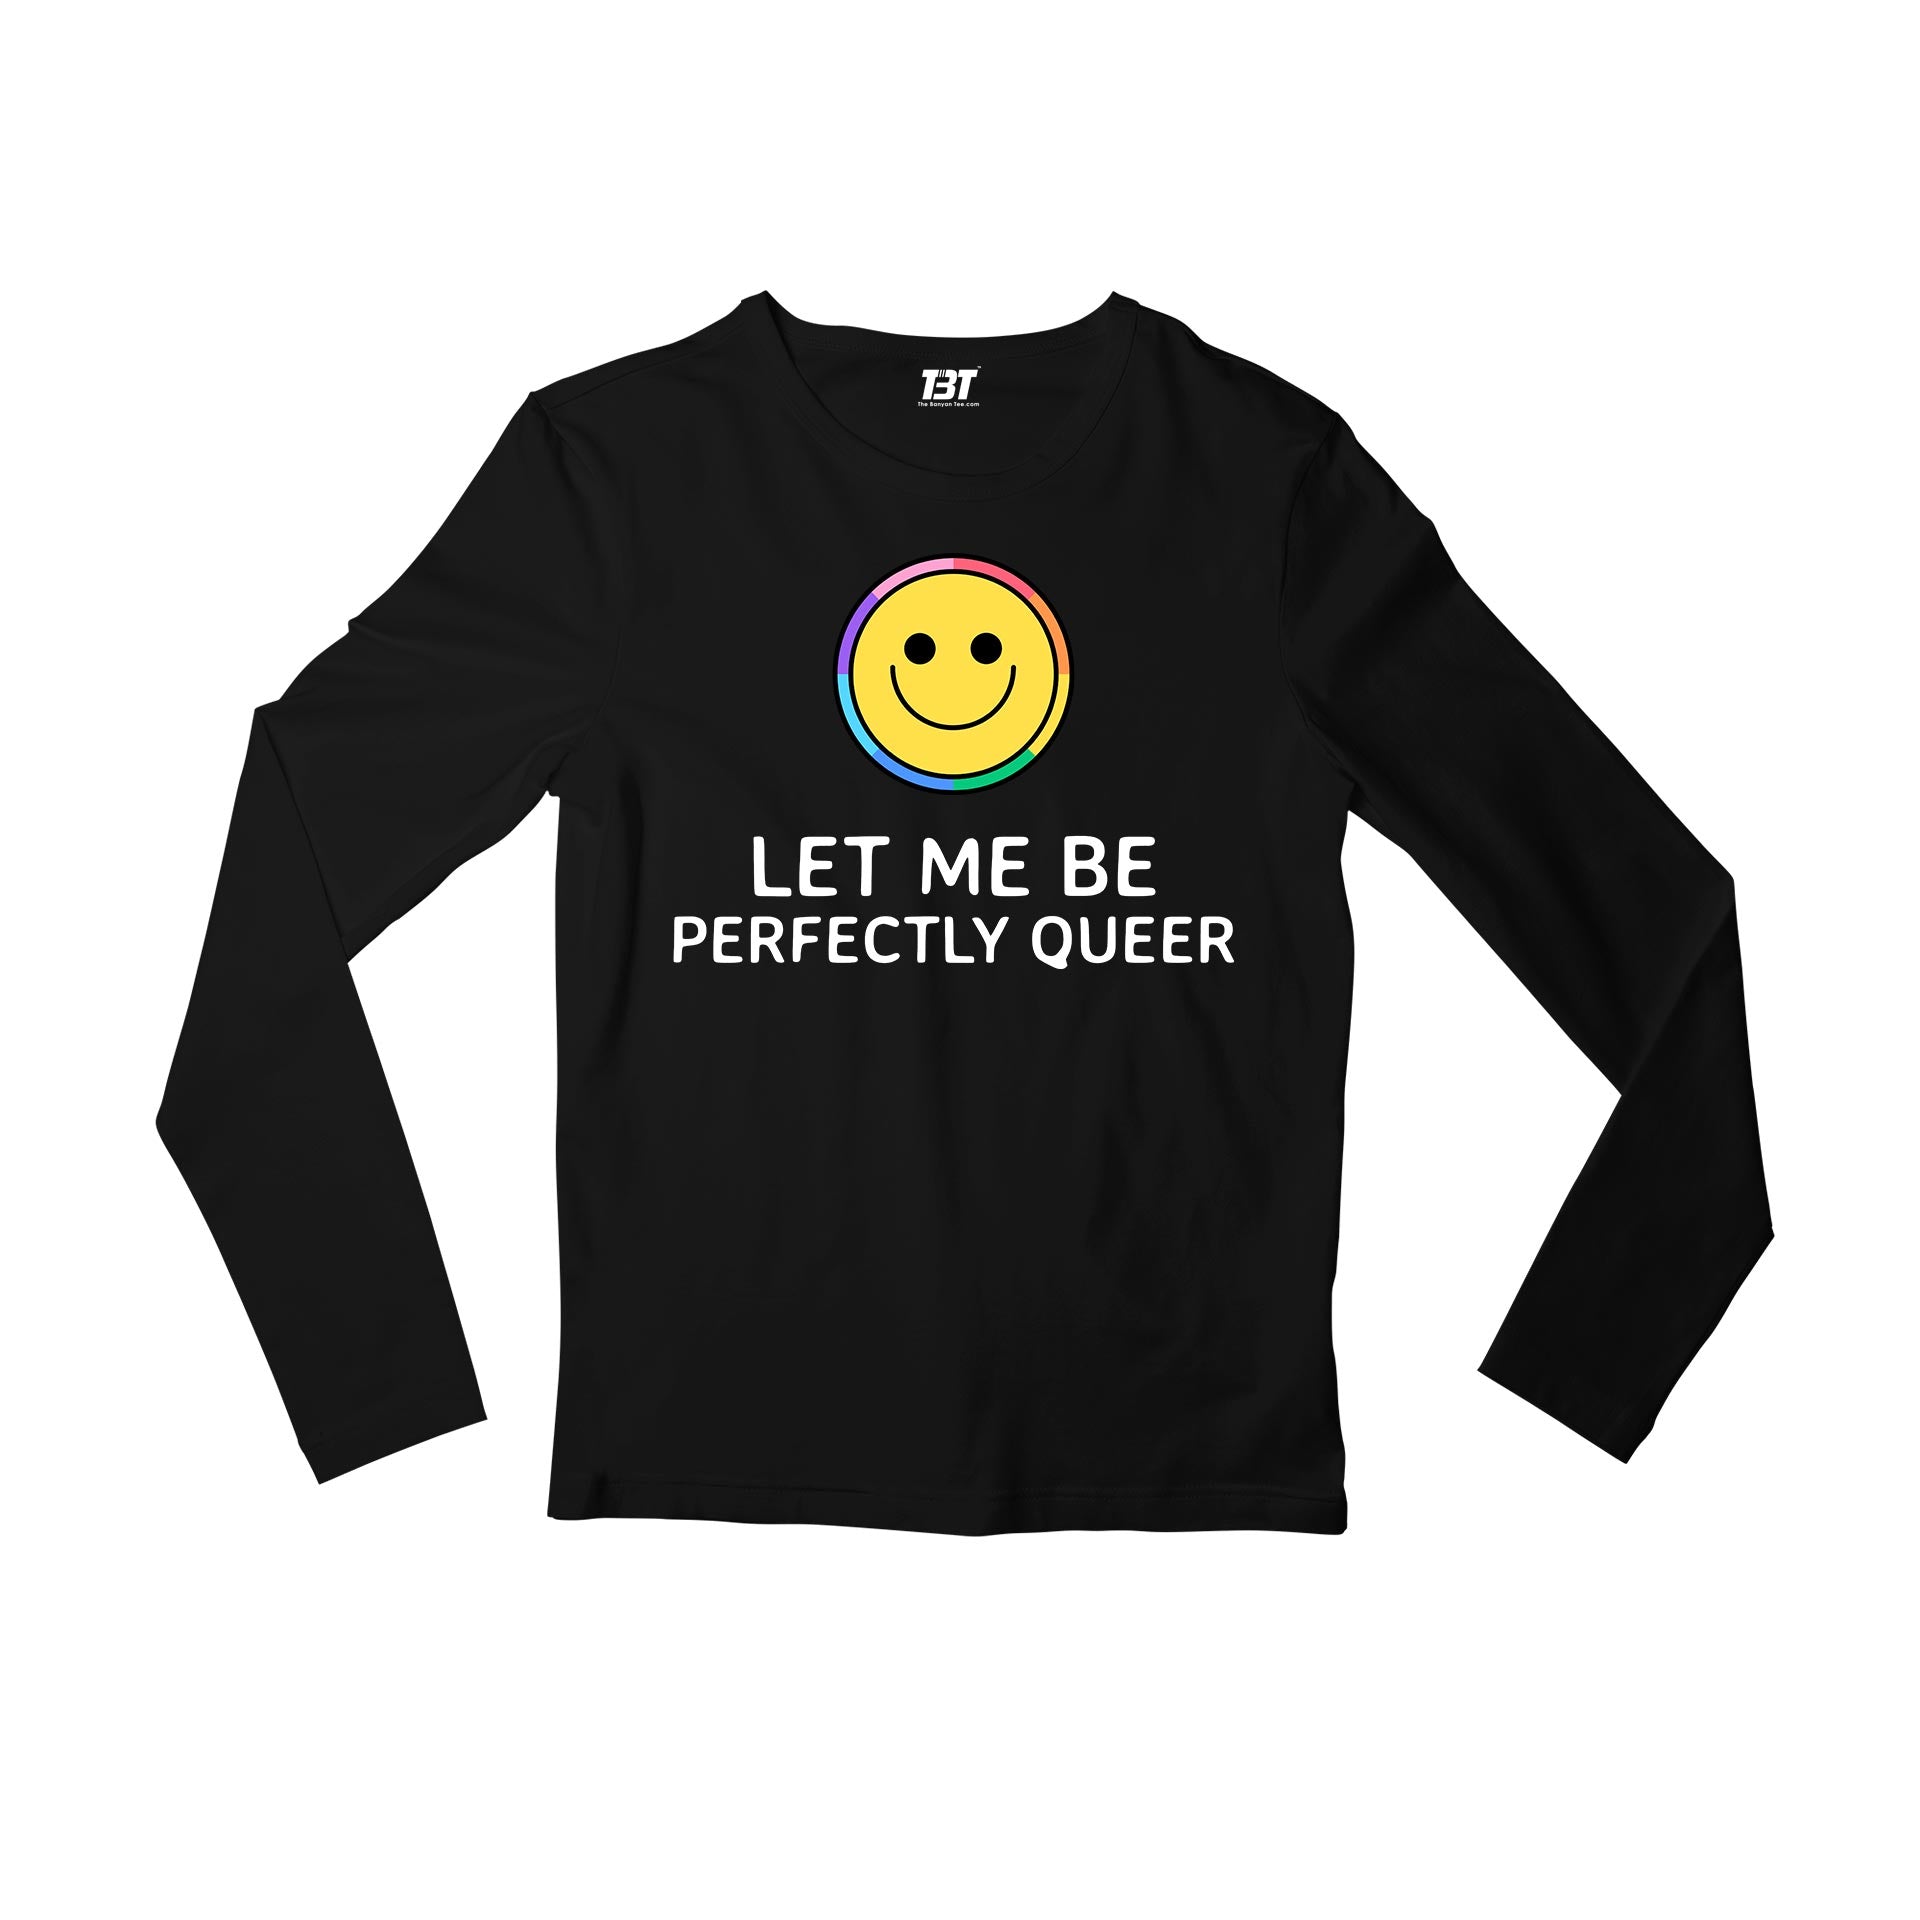 pride let me be perfectly queer full sleeves long sleeves printed graphic stylish buy online india the banyan tee tbt men women girls boys unisex black - lgbtqia+